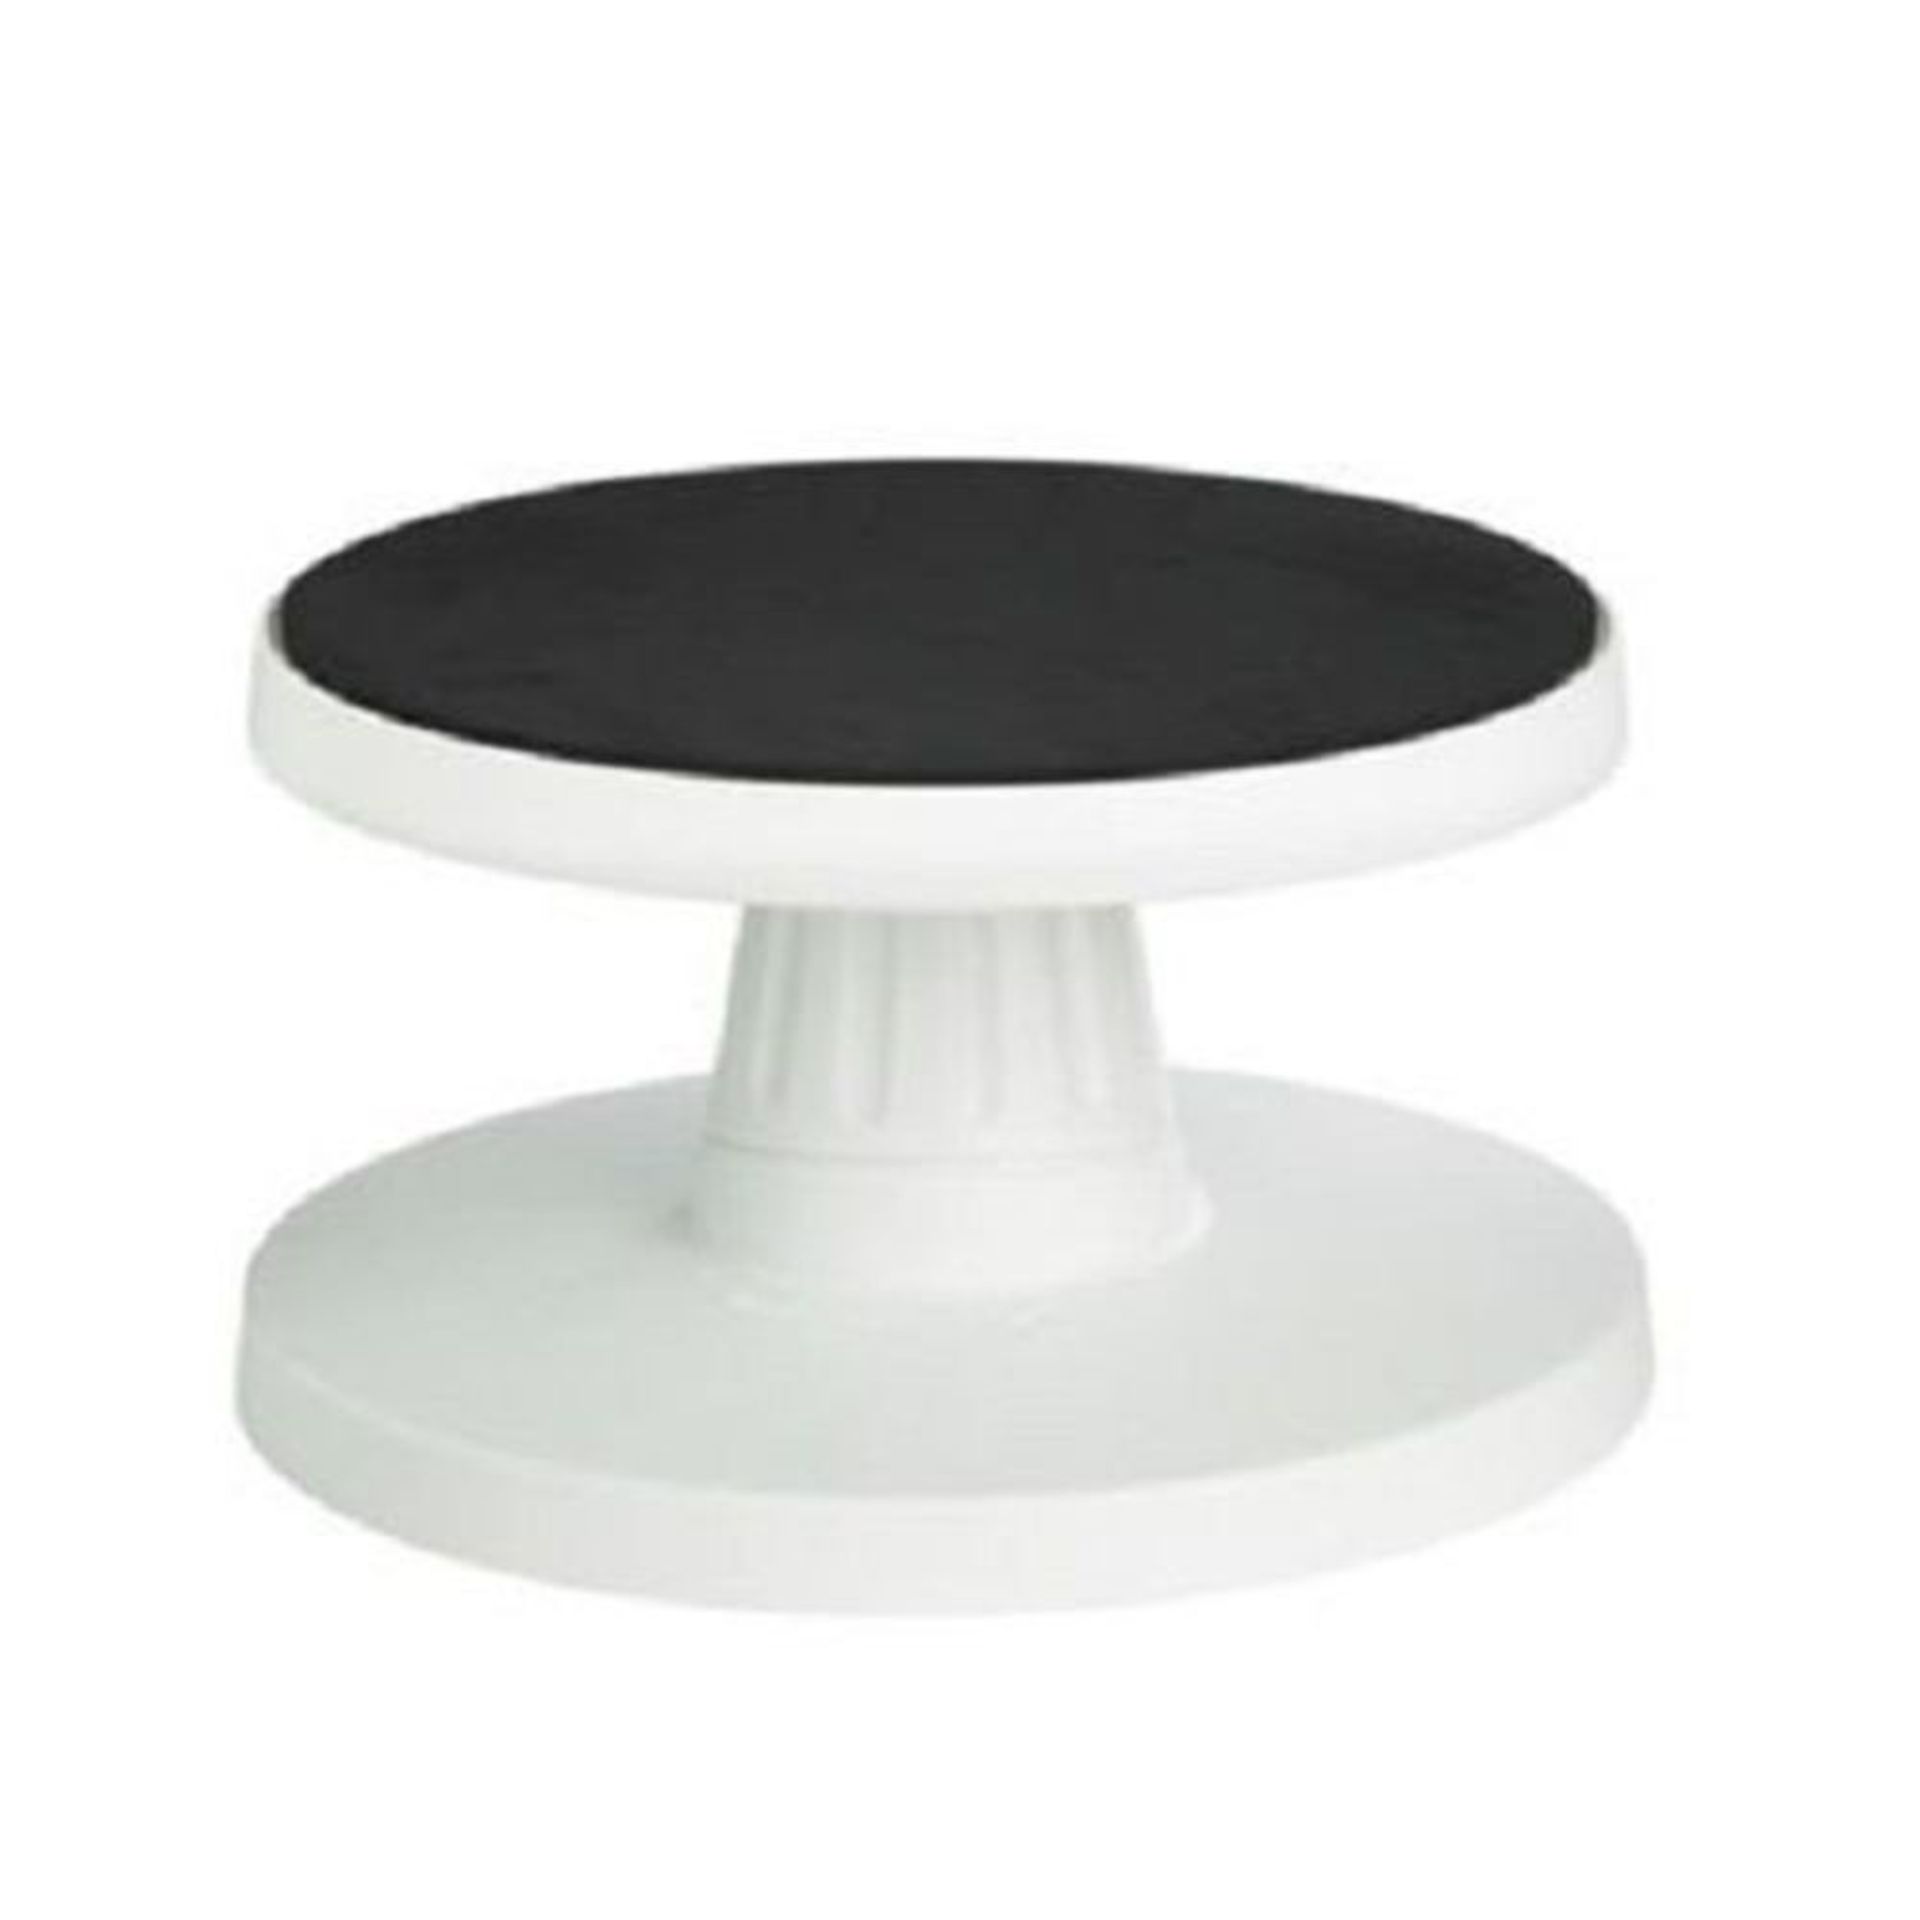 V *TRADE QTY* Brand New Adjustable Cake Decorating Table RRP £20.39 X 8 YOUR BID PRICE TO BE